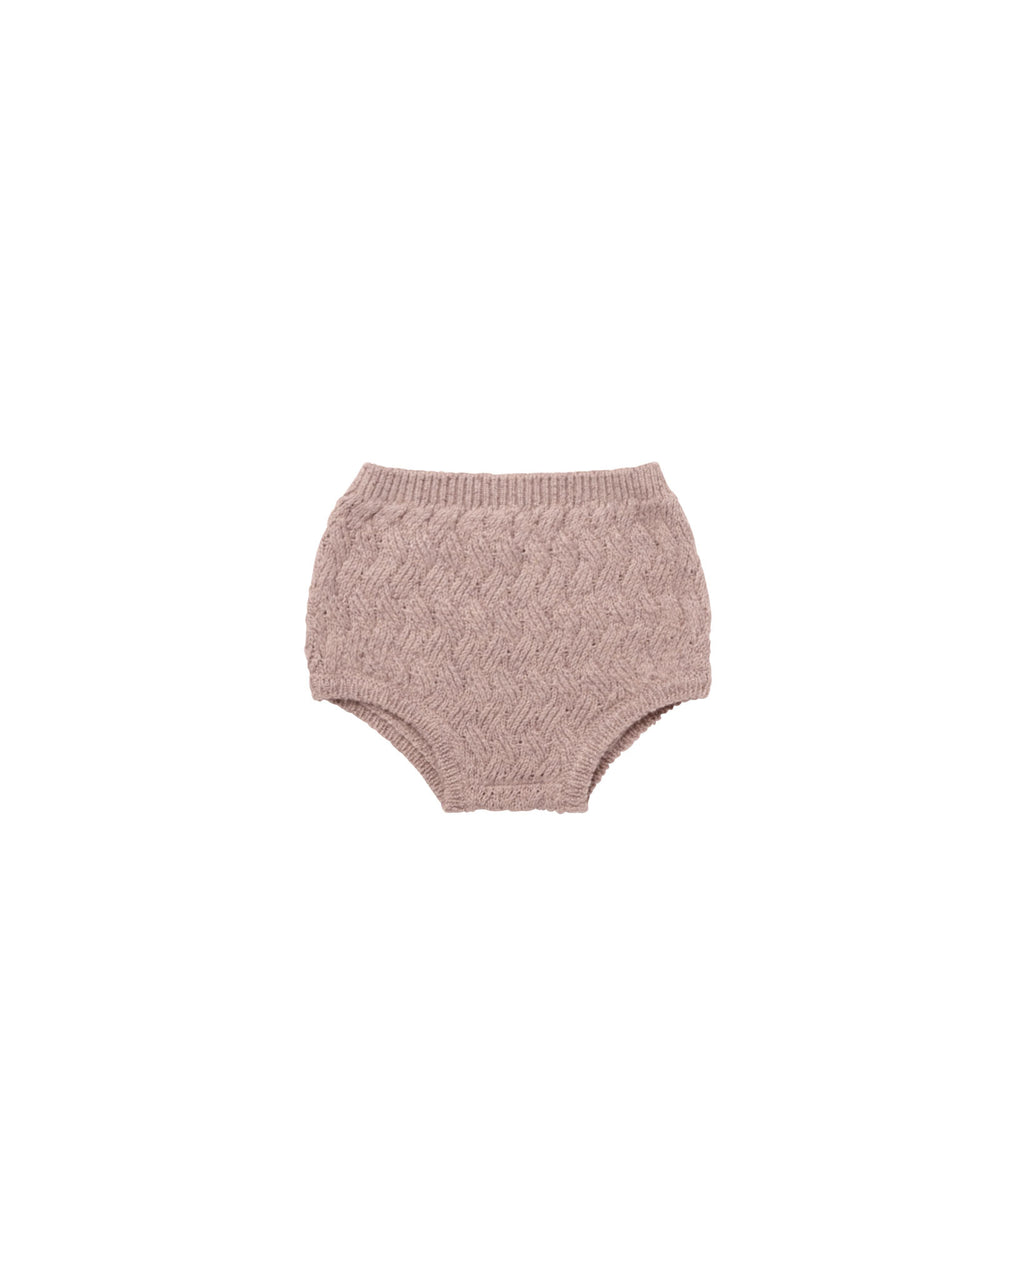 Quincy Mae Knit Bloomer - Mauve